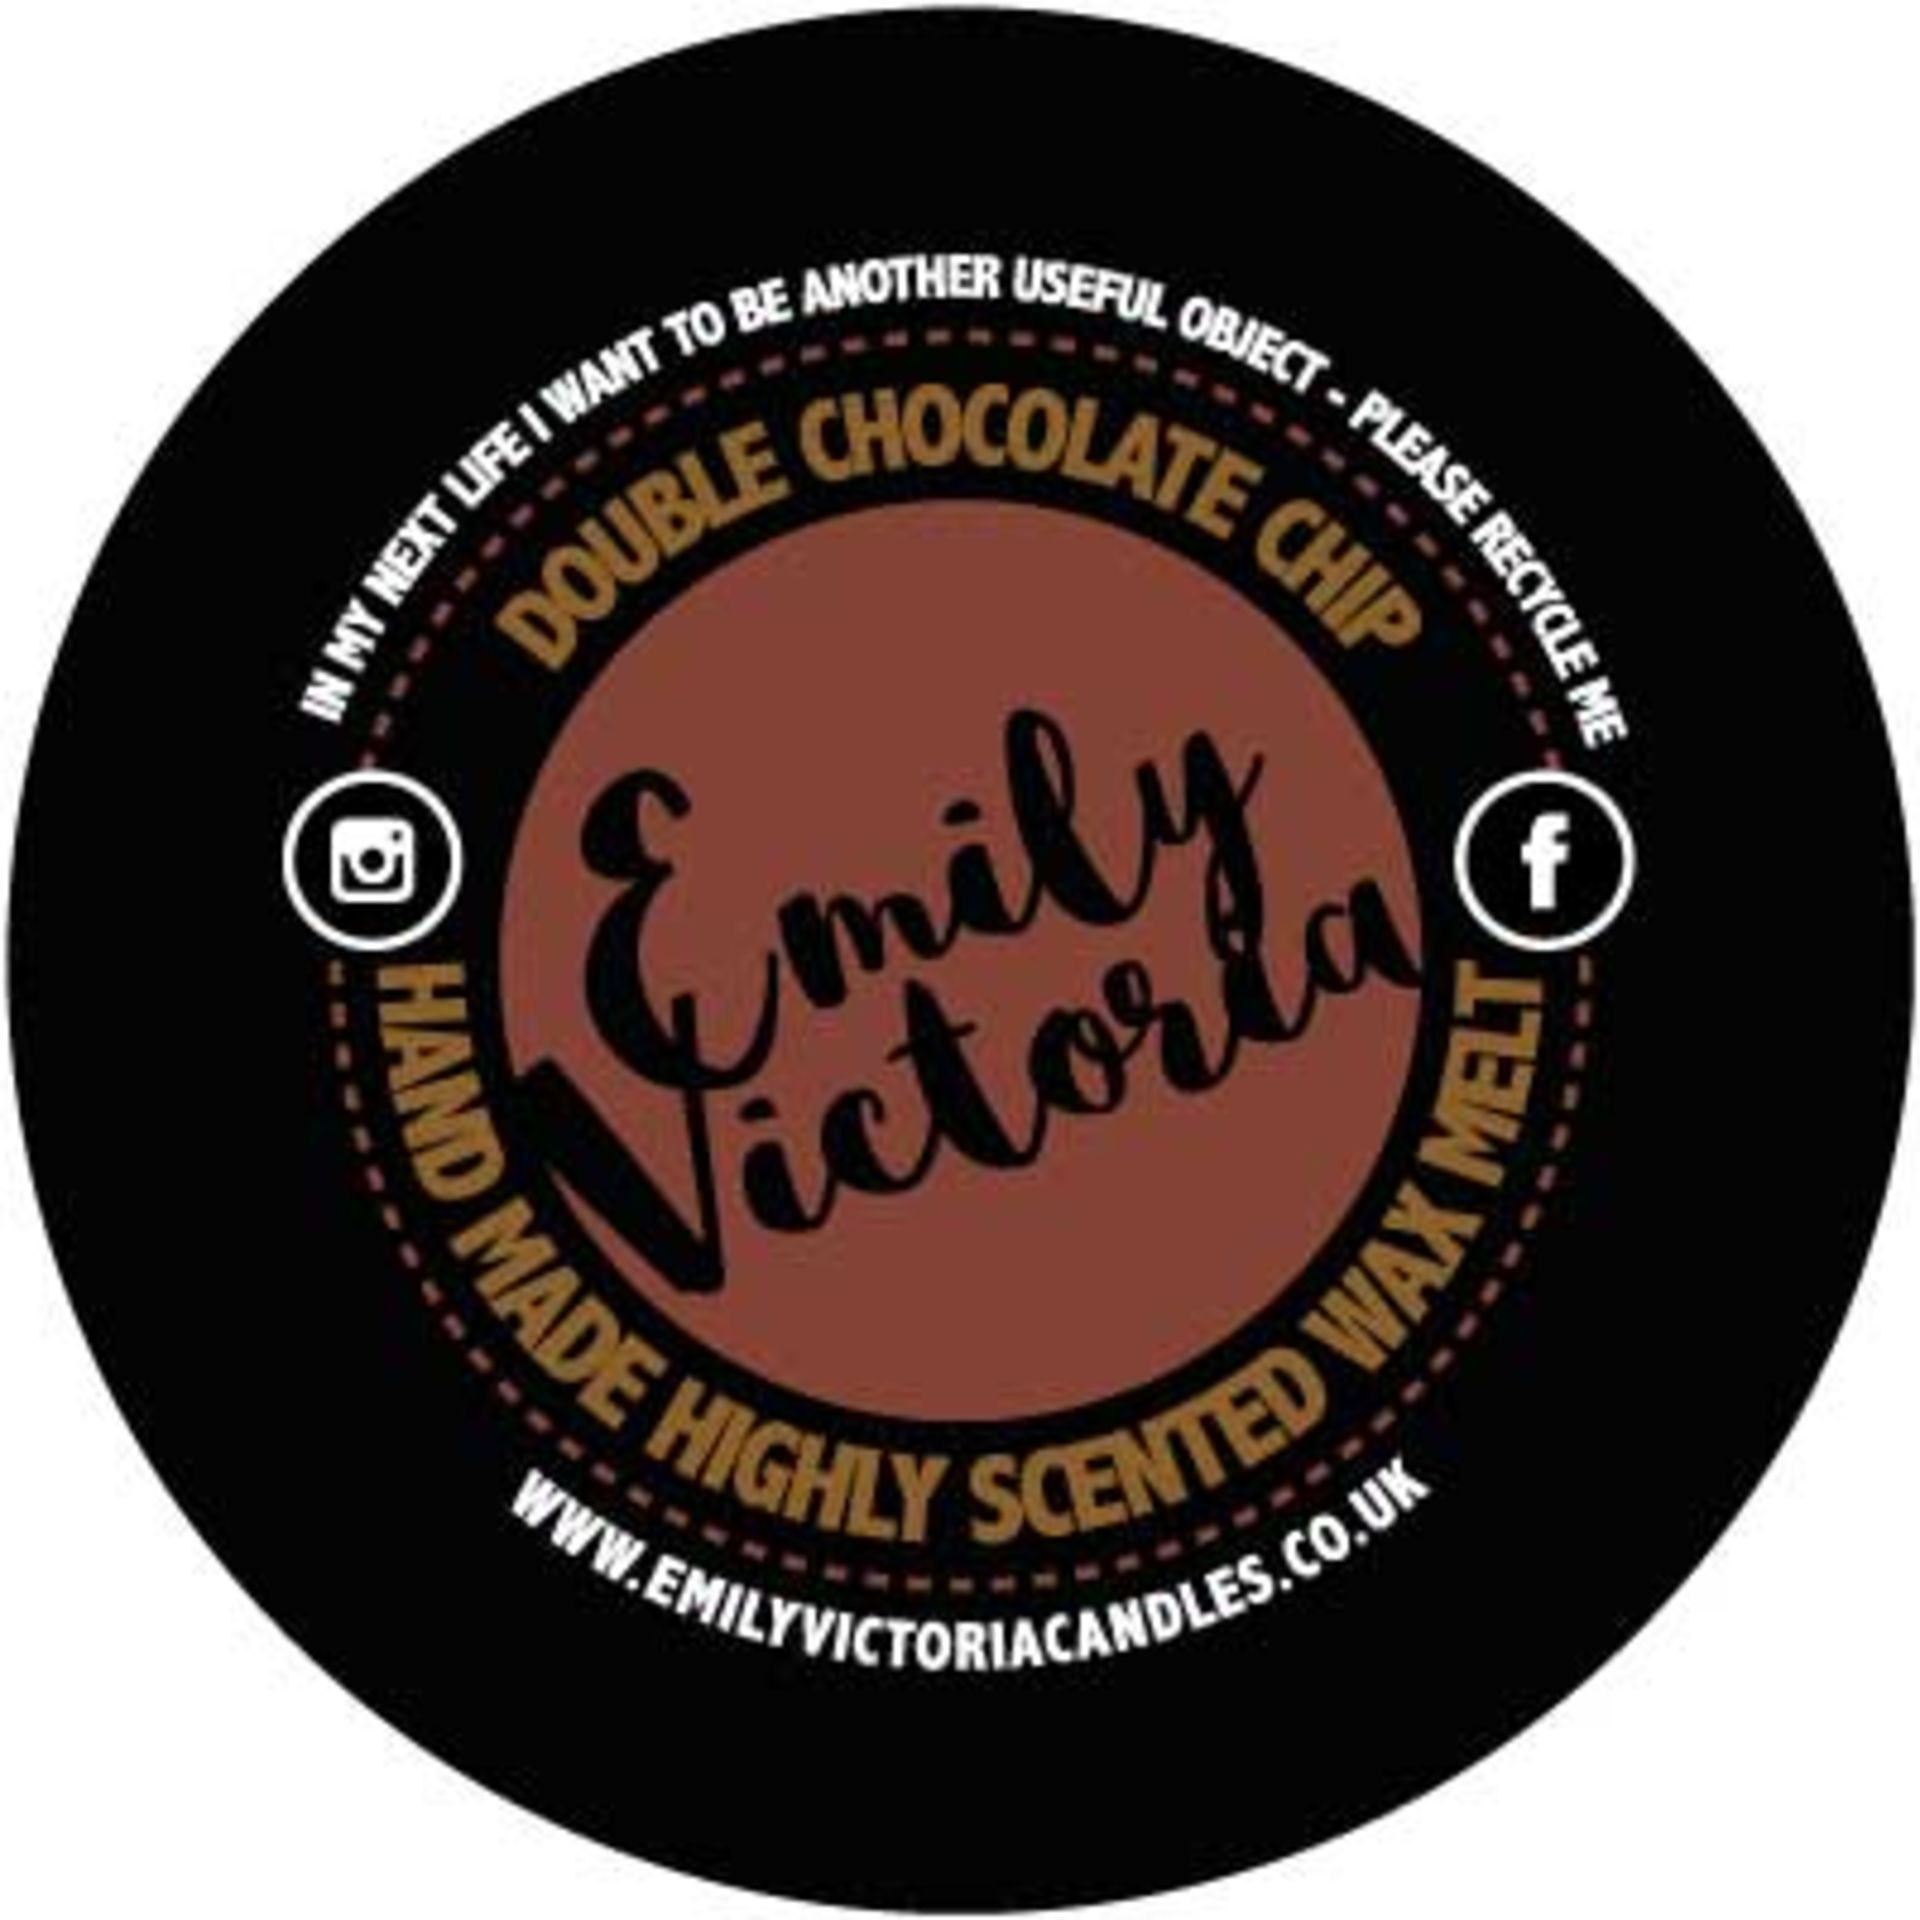 75 X BRAND NEW EMILY VICTORIA CANDLE DOUBLE CHOCOLATE CHIP 30G HIGHLY SCENTED WAX MELTS S1